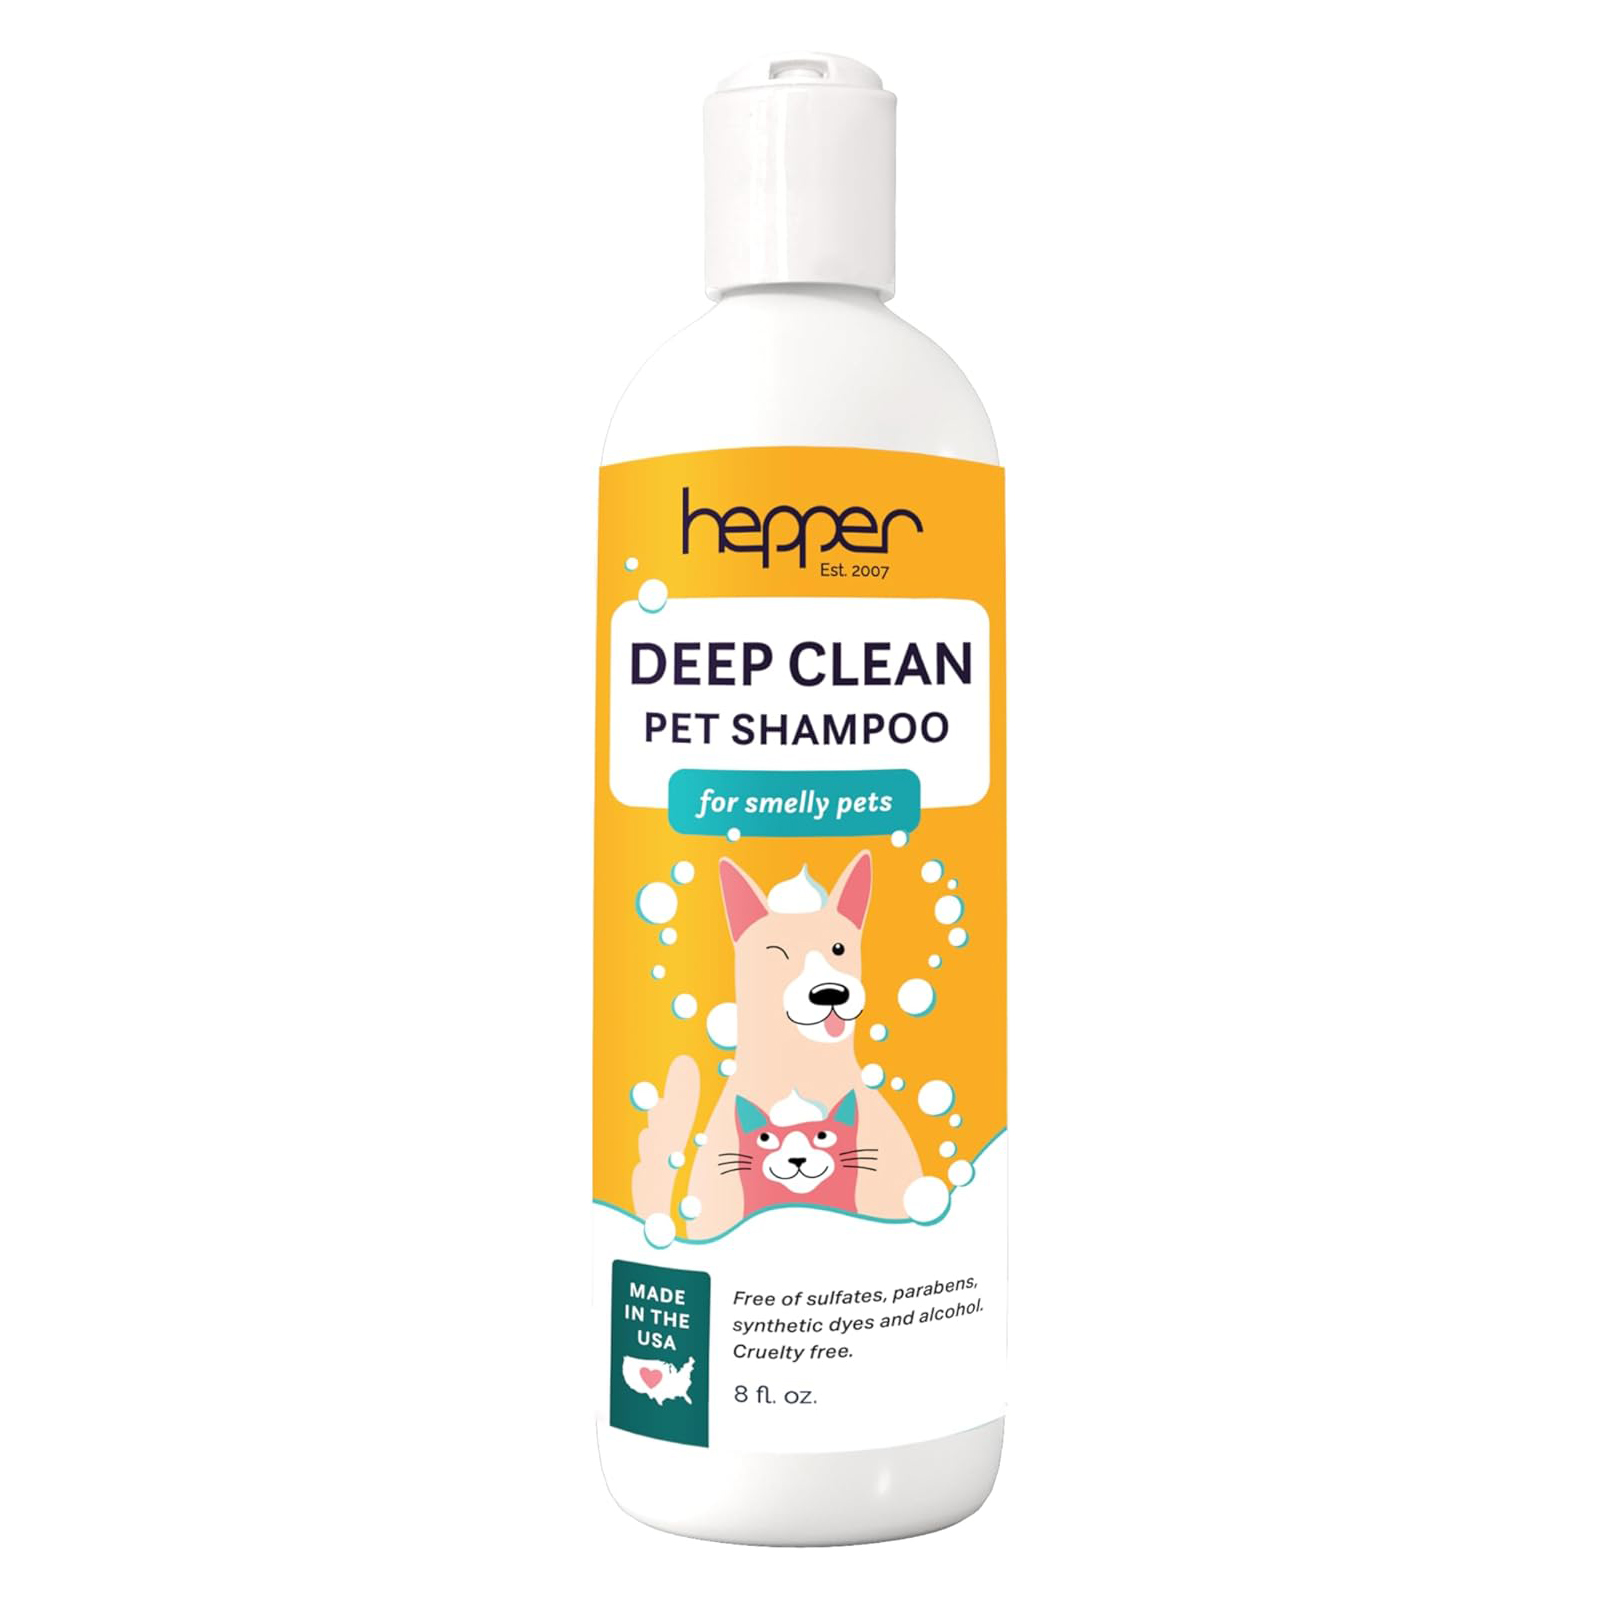 Hepper Deep Clean Pet Shampoo for Smelly Pets